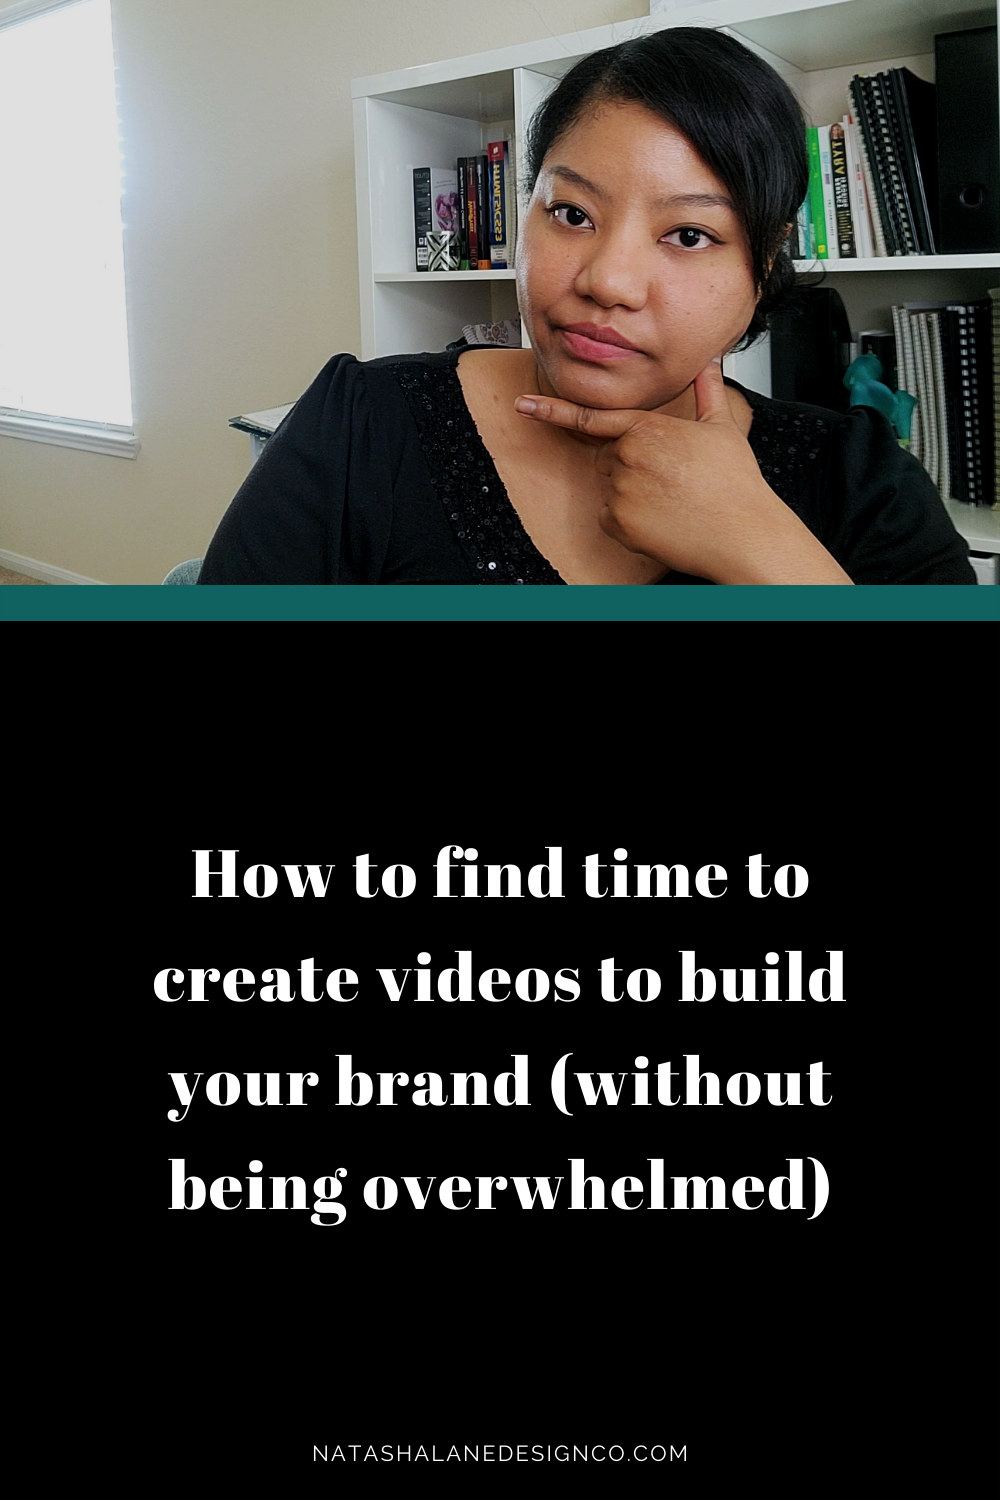 find time to create videos to build your brand (without being overwhelmed)